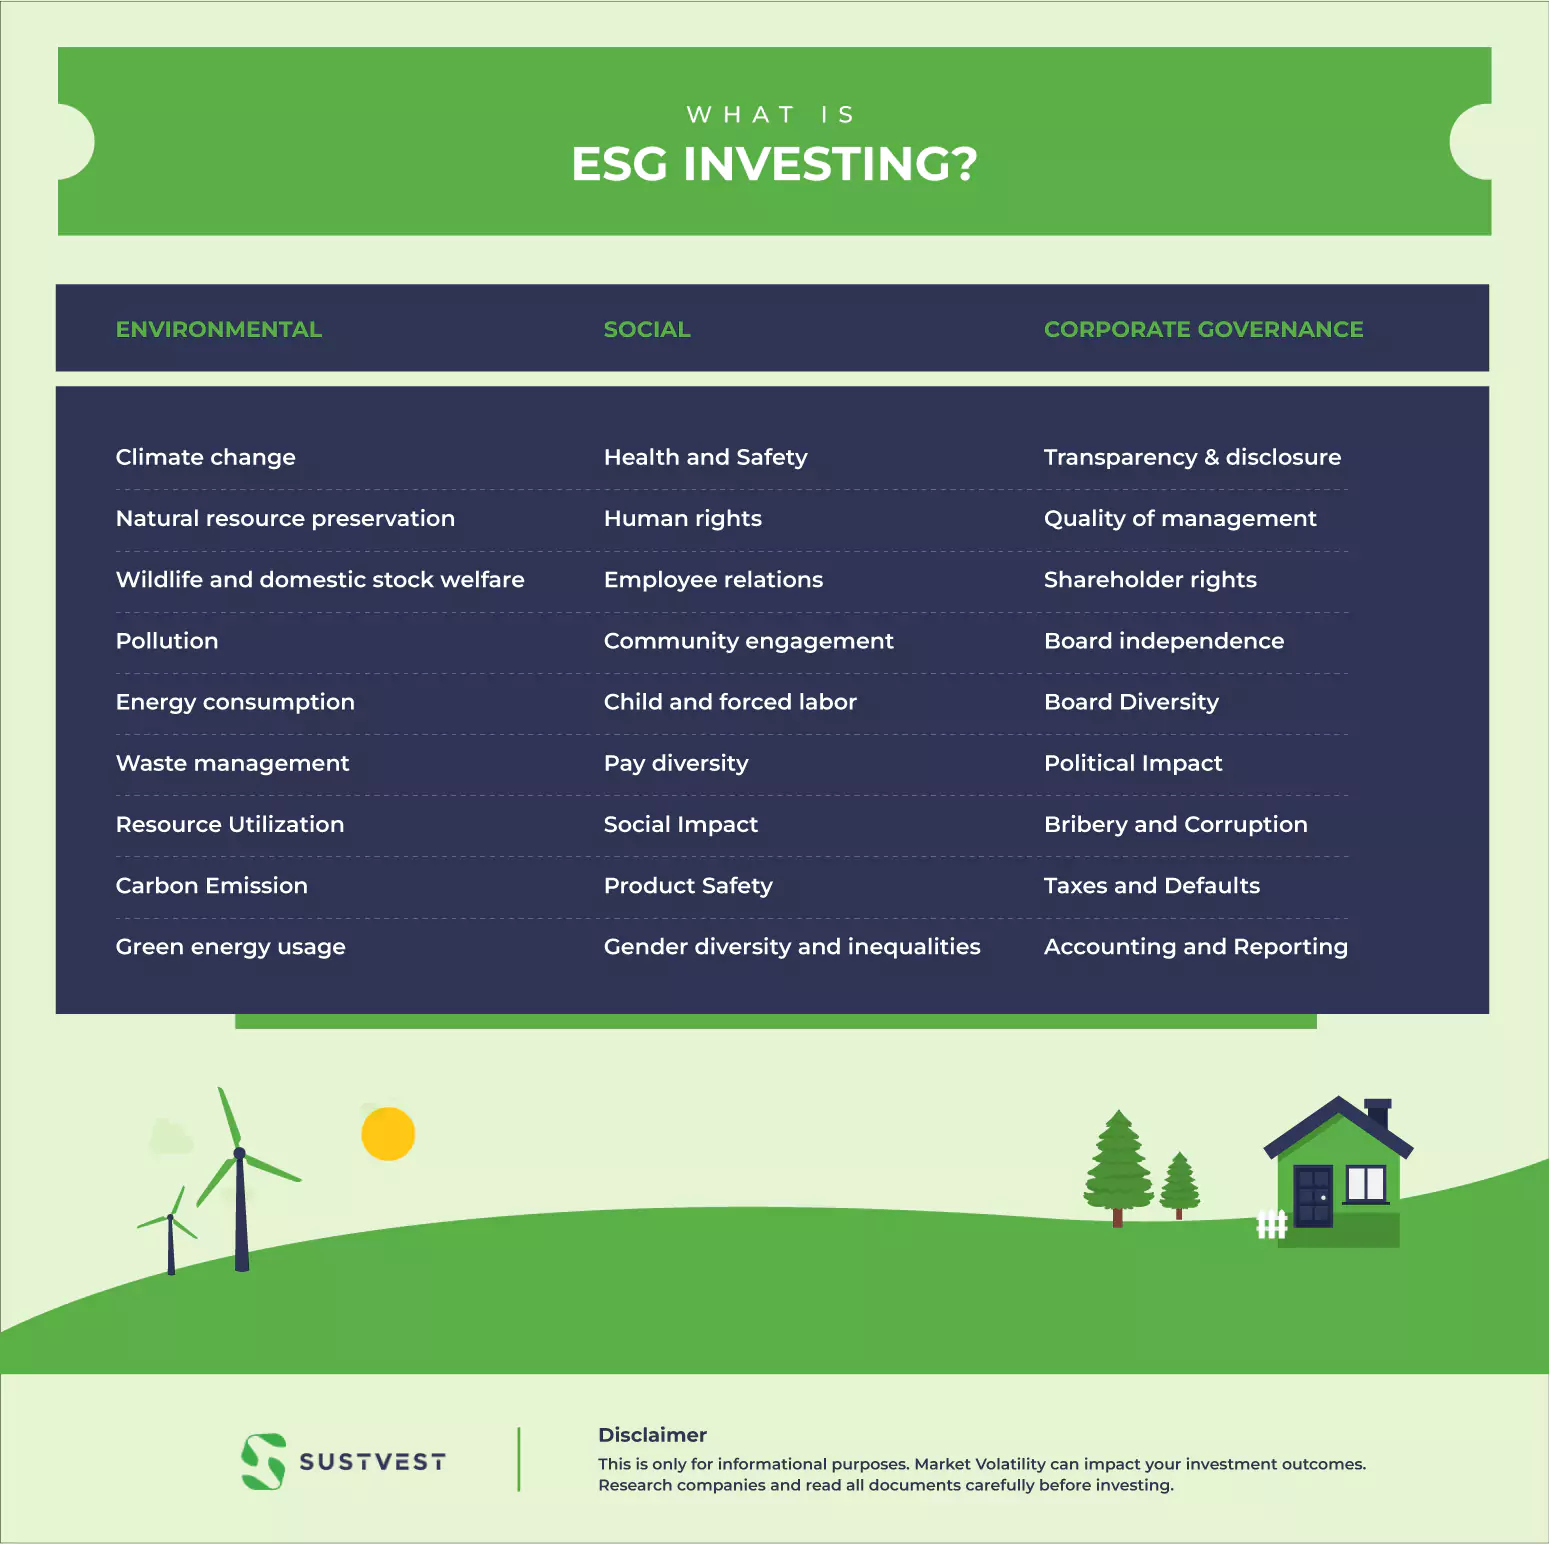 What Is ESG Investing?
